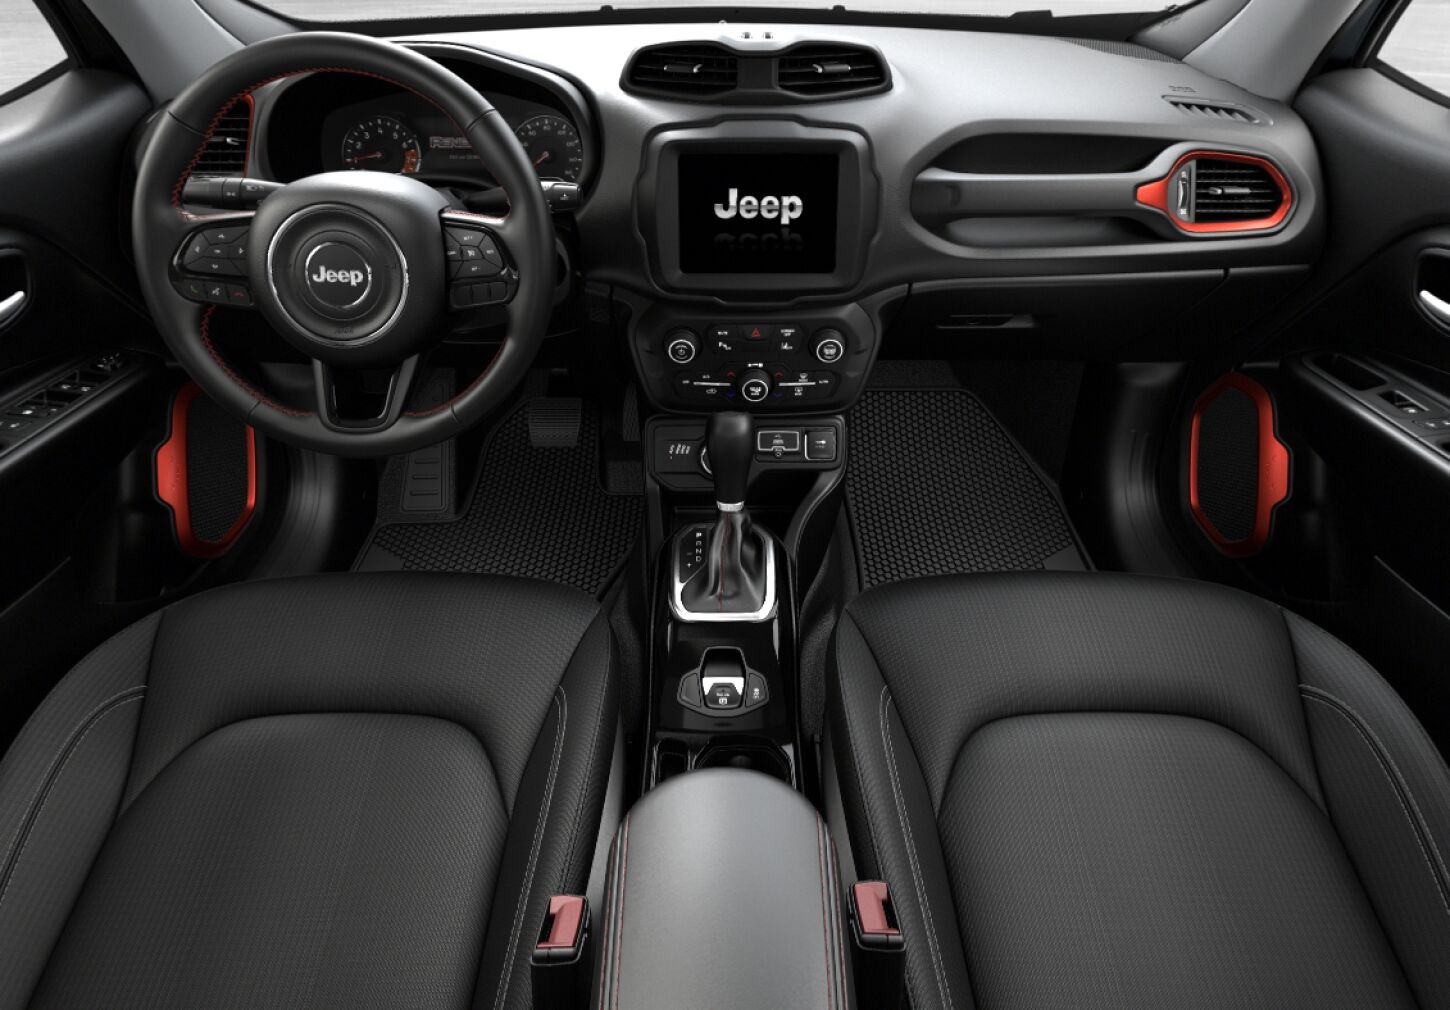 2022 Jeep Renegade Red Edition interior from the rear seats